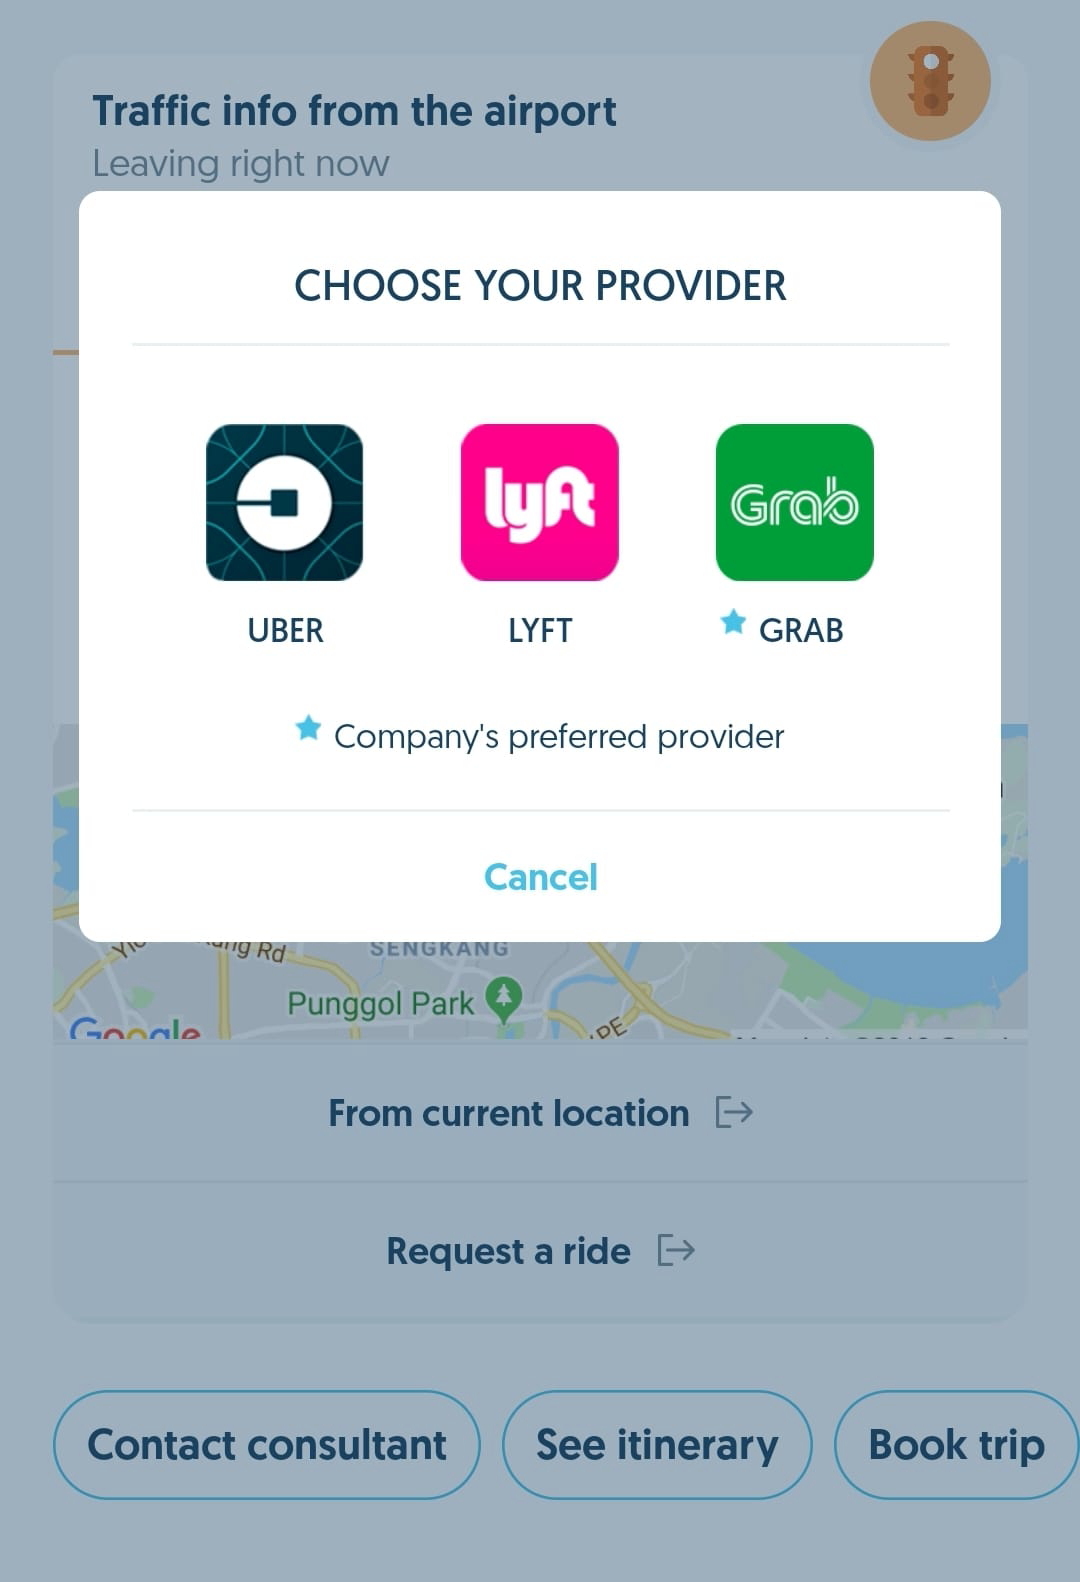 FCM Travel Solutions has partnered the ride-sharing service, Grab. Through this collaboration, business travellers can book Grab rides via FCM’s Smart Assistant for Mobile (SAM) app in seven countries including Singapore, Indonesia, Malaysia, Myanmar, Thailand, Philippines and Vietnam. Click to enlarge.